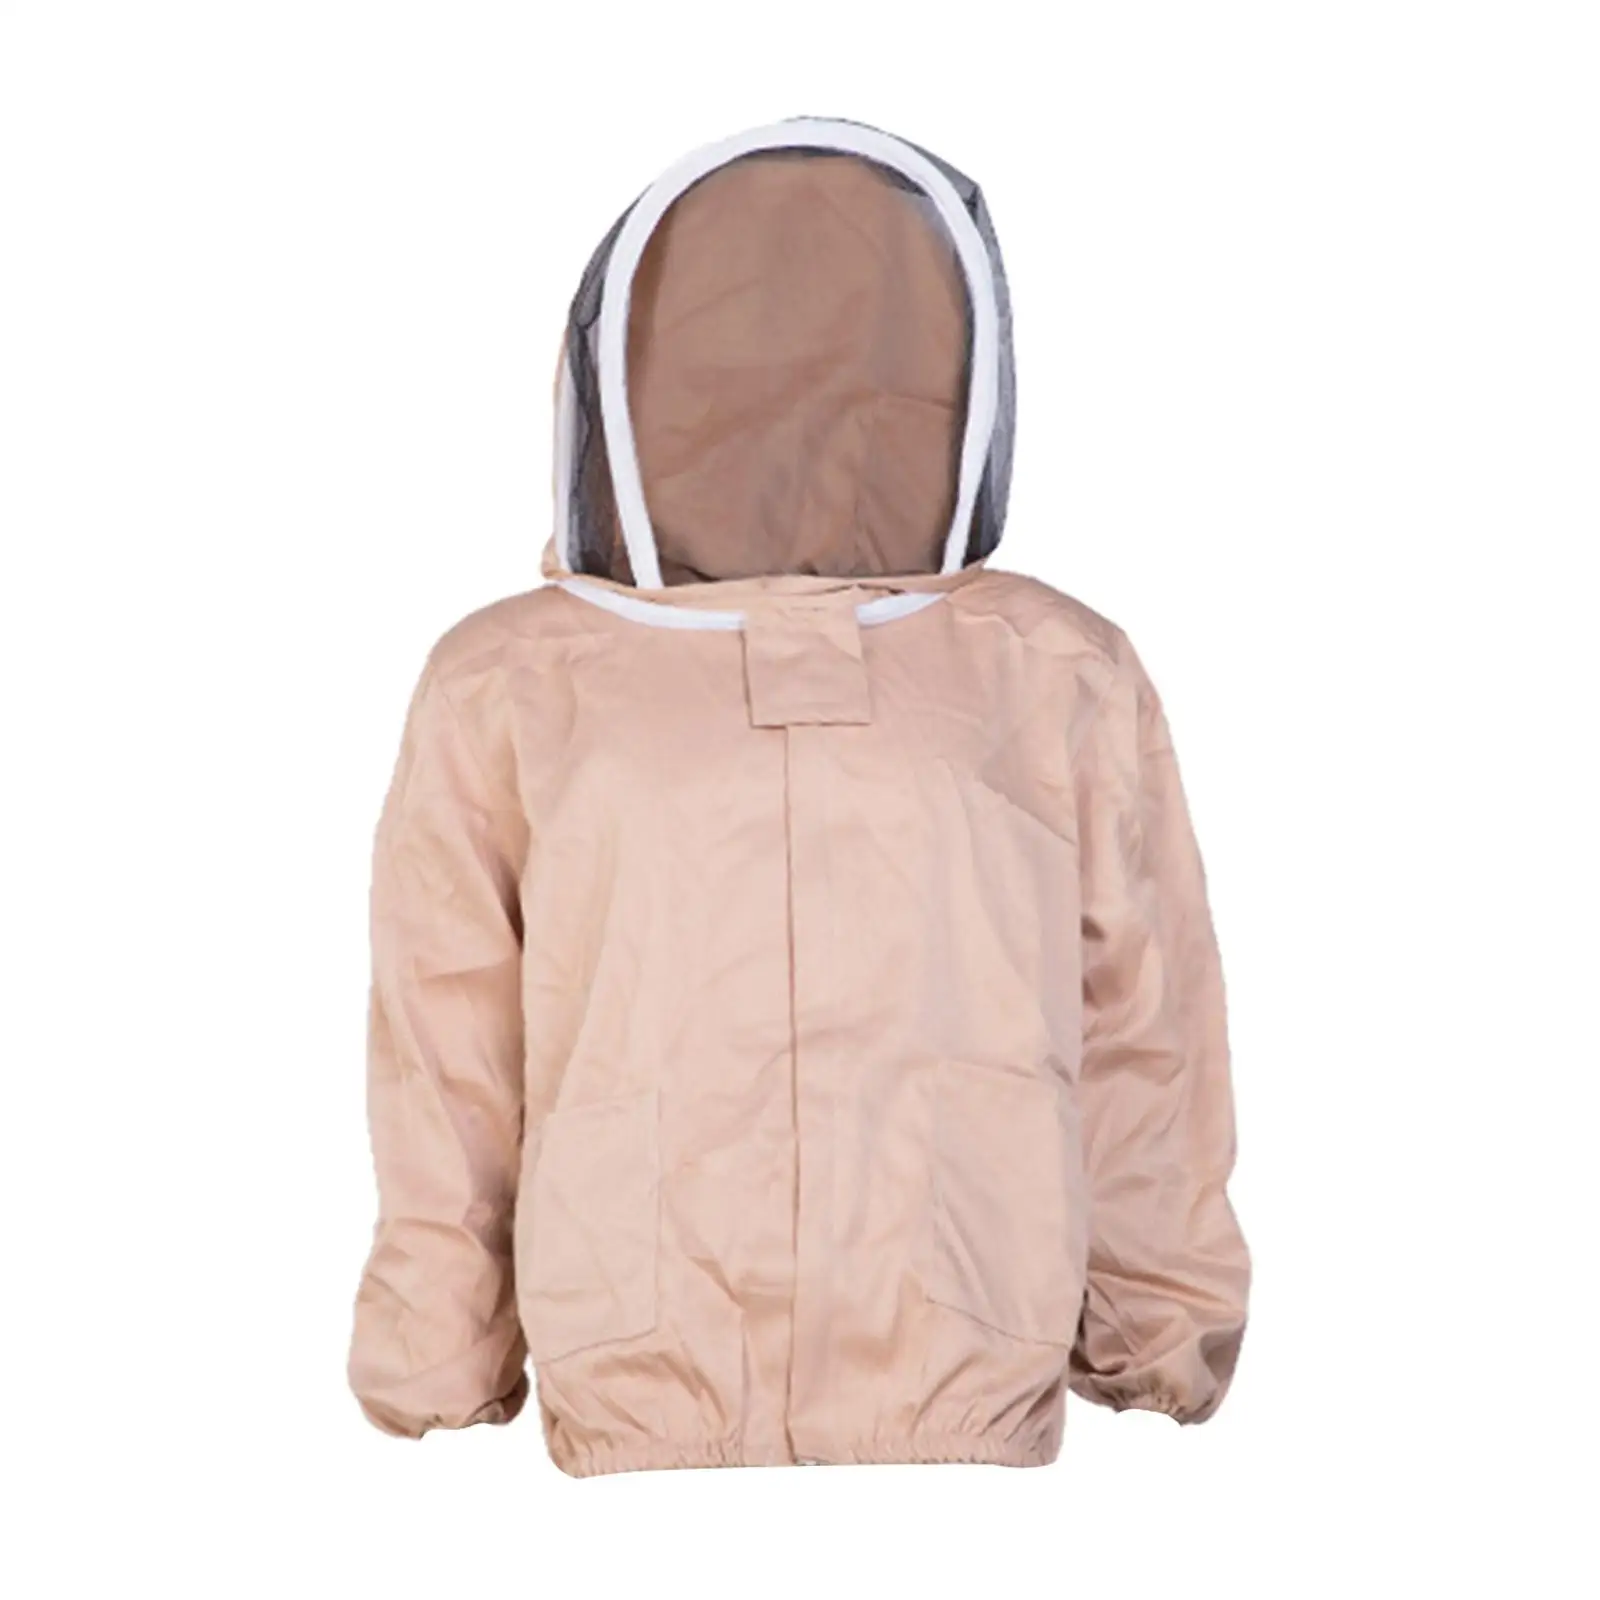 Beekeeper Jacket with Fencing Veil with Pockets Professional with Hat Equip